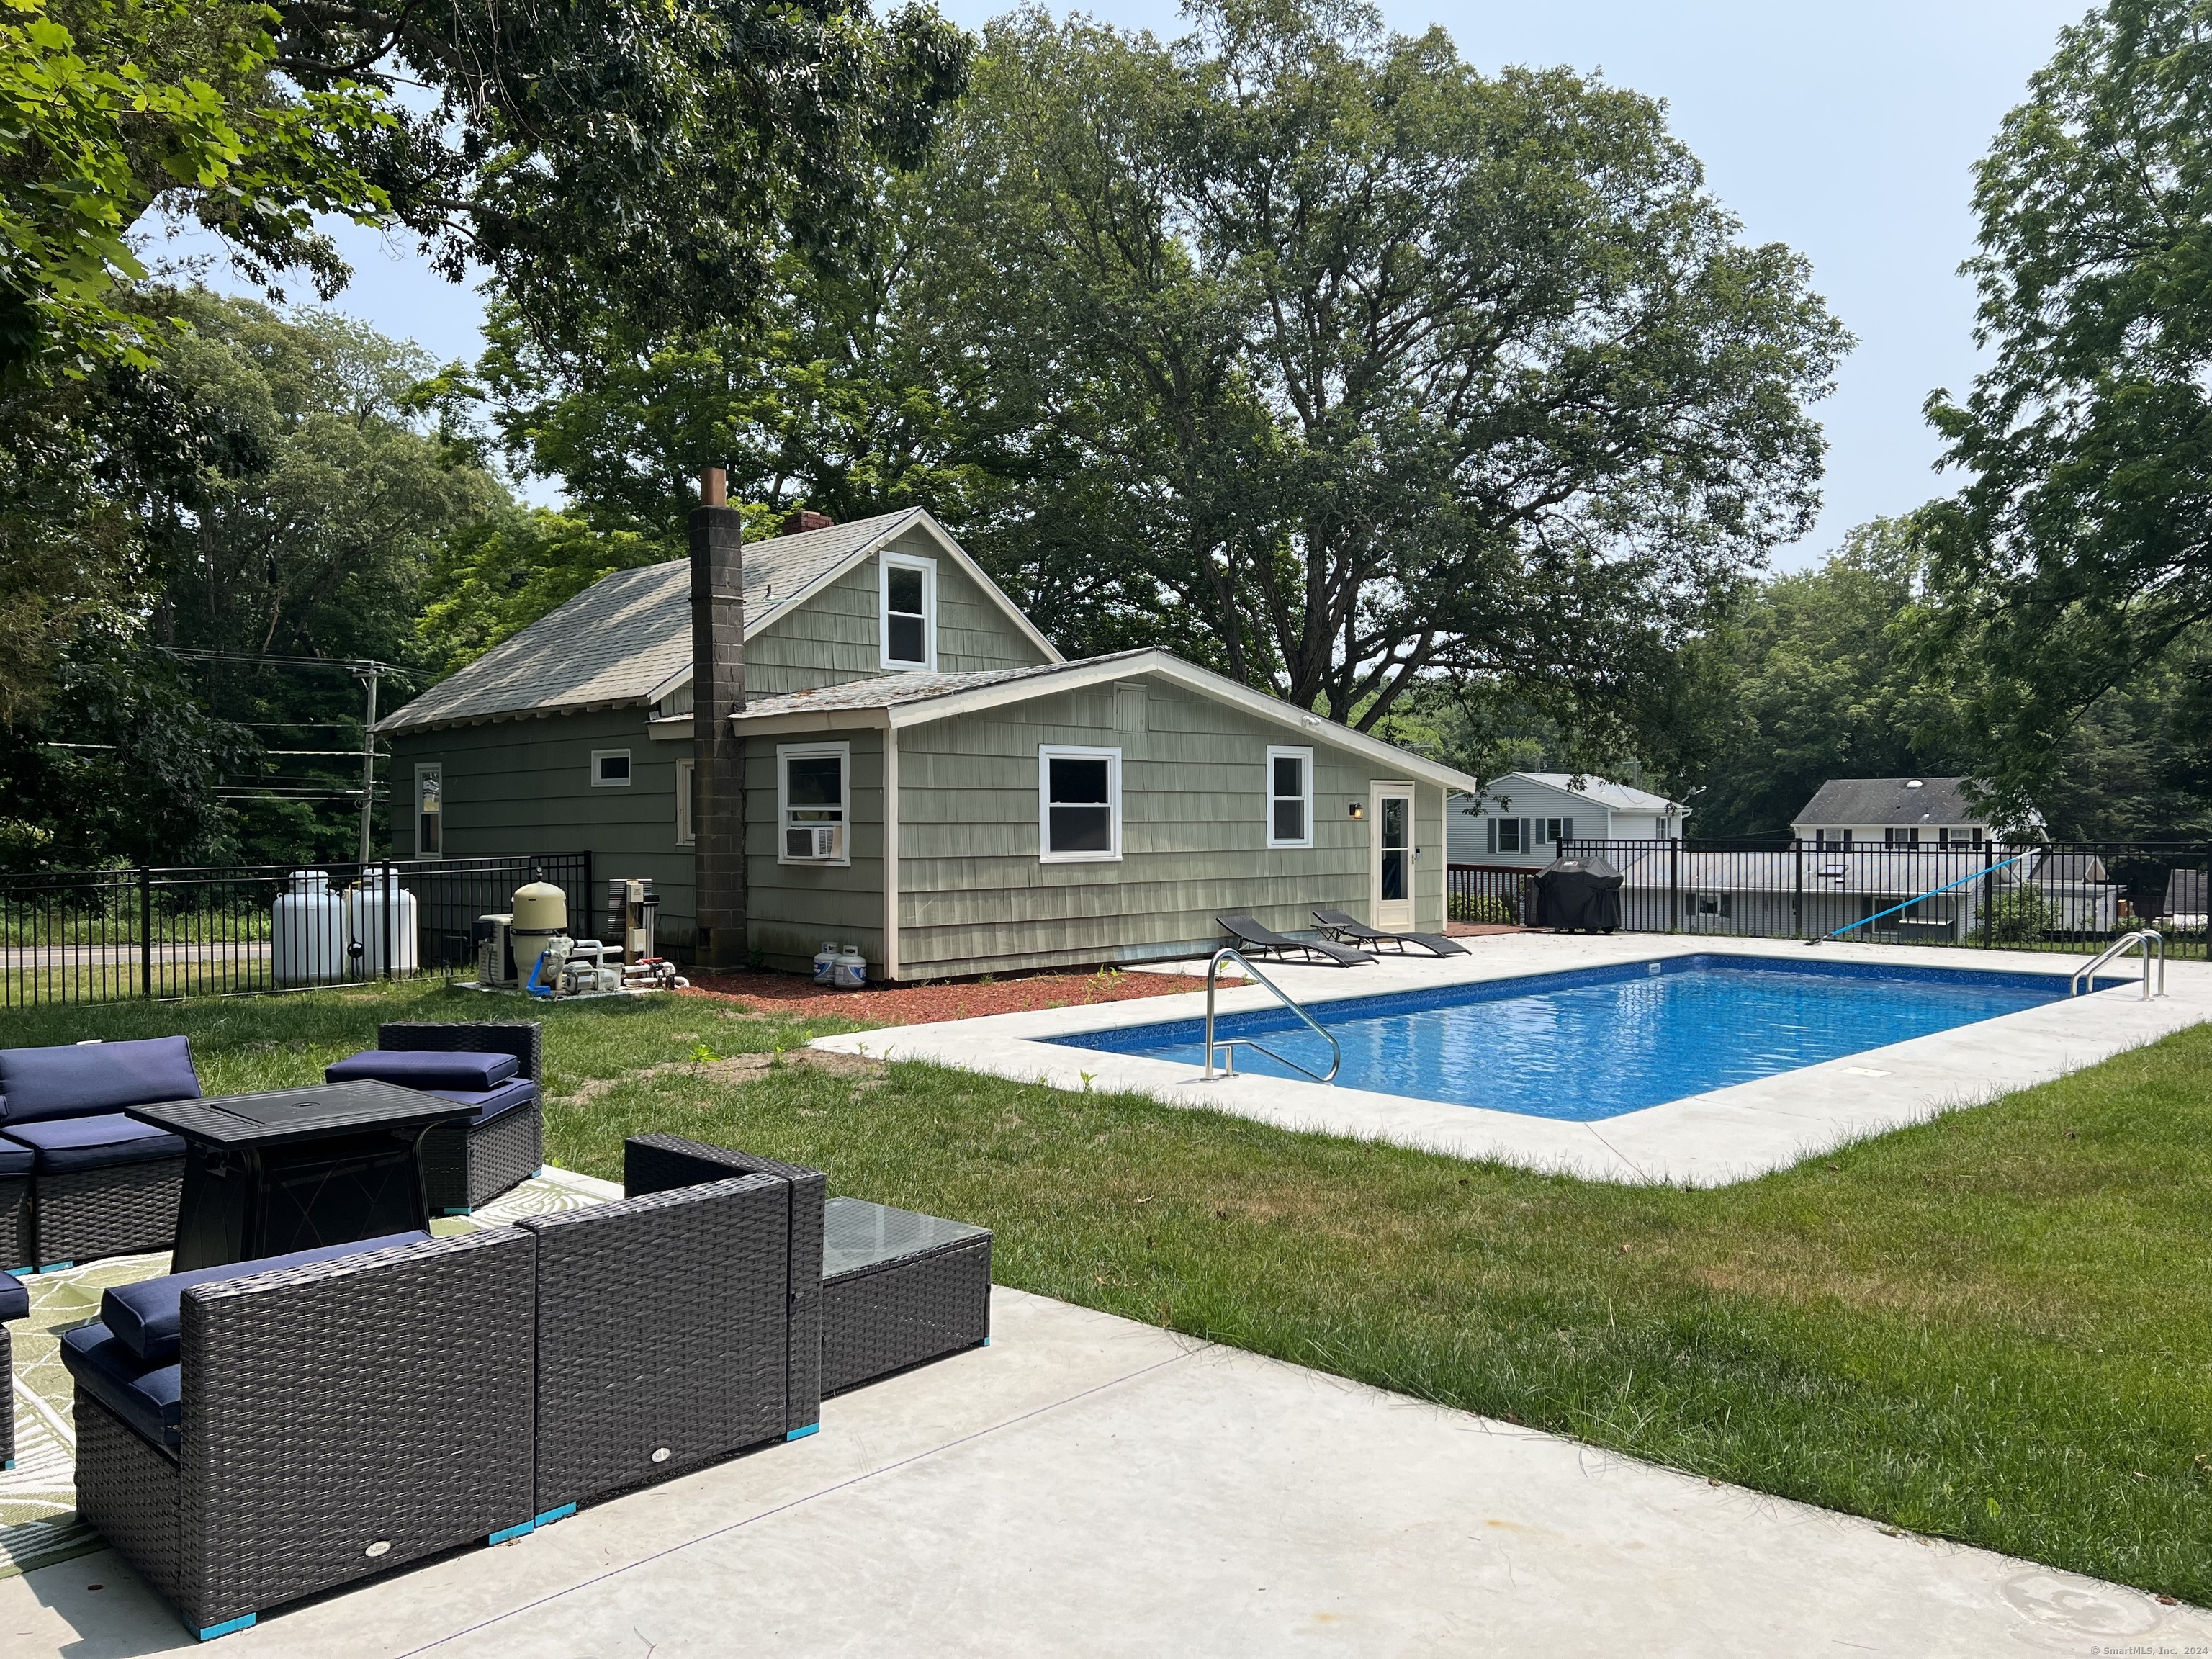 Rental Property at 329 Horse Pond Road, Madison, Connecticut - Bedrooms: 3 
Bathrooms: 1 
Rooms: 5  - $3,000 MO.